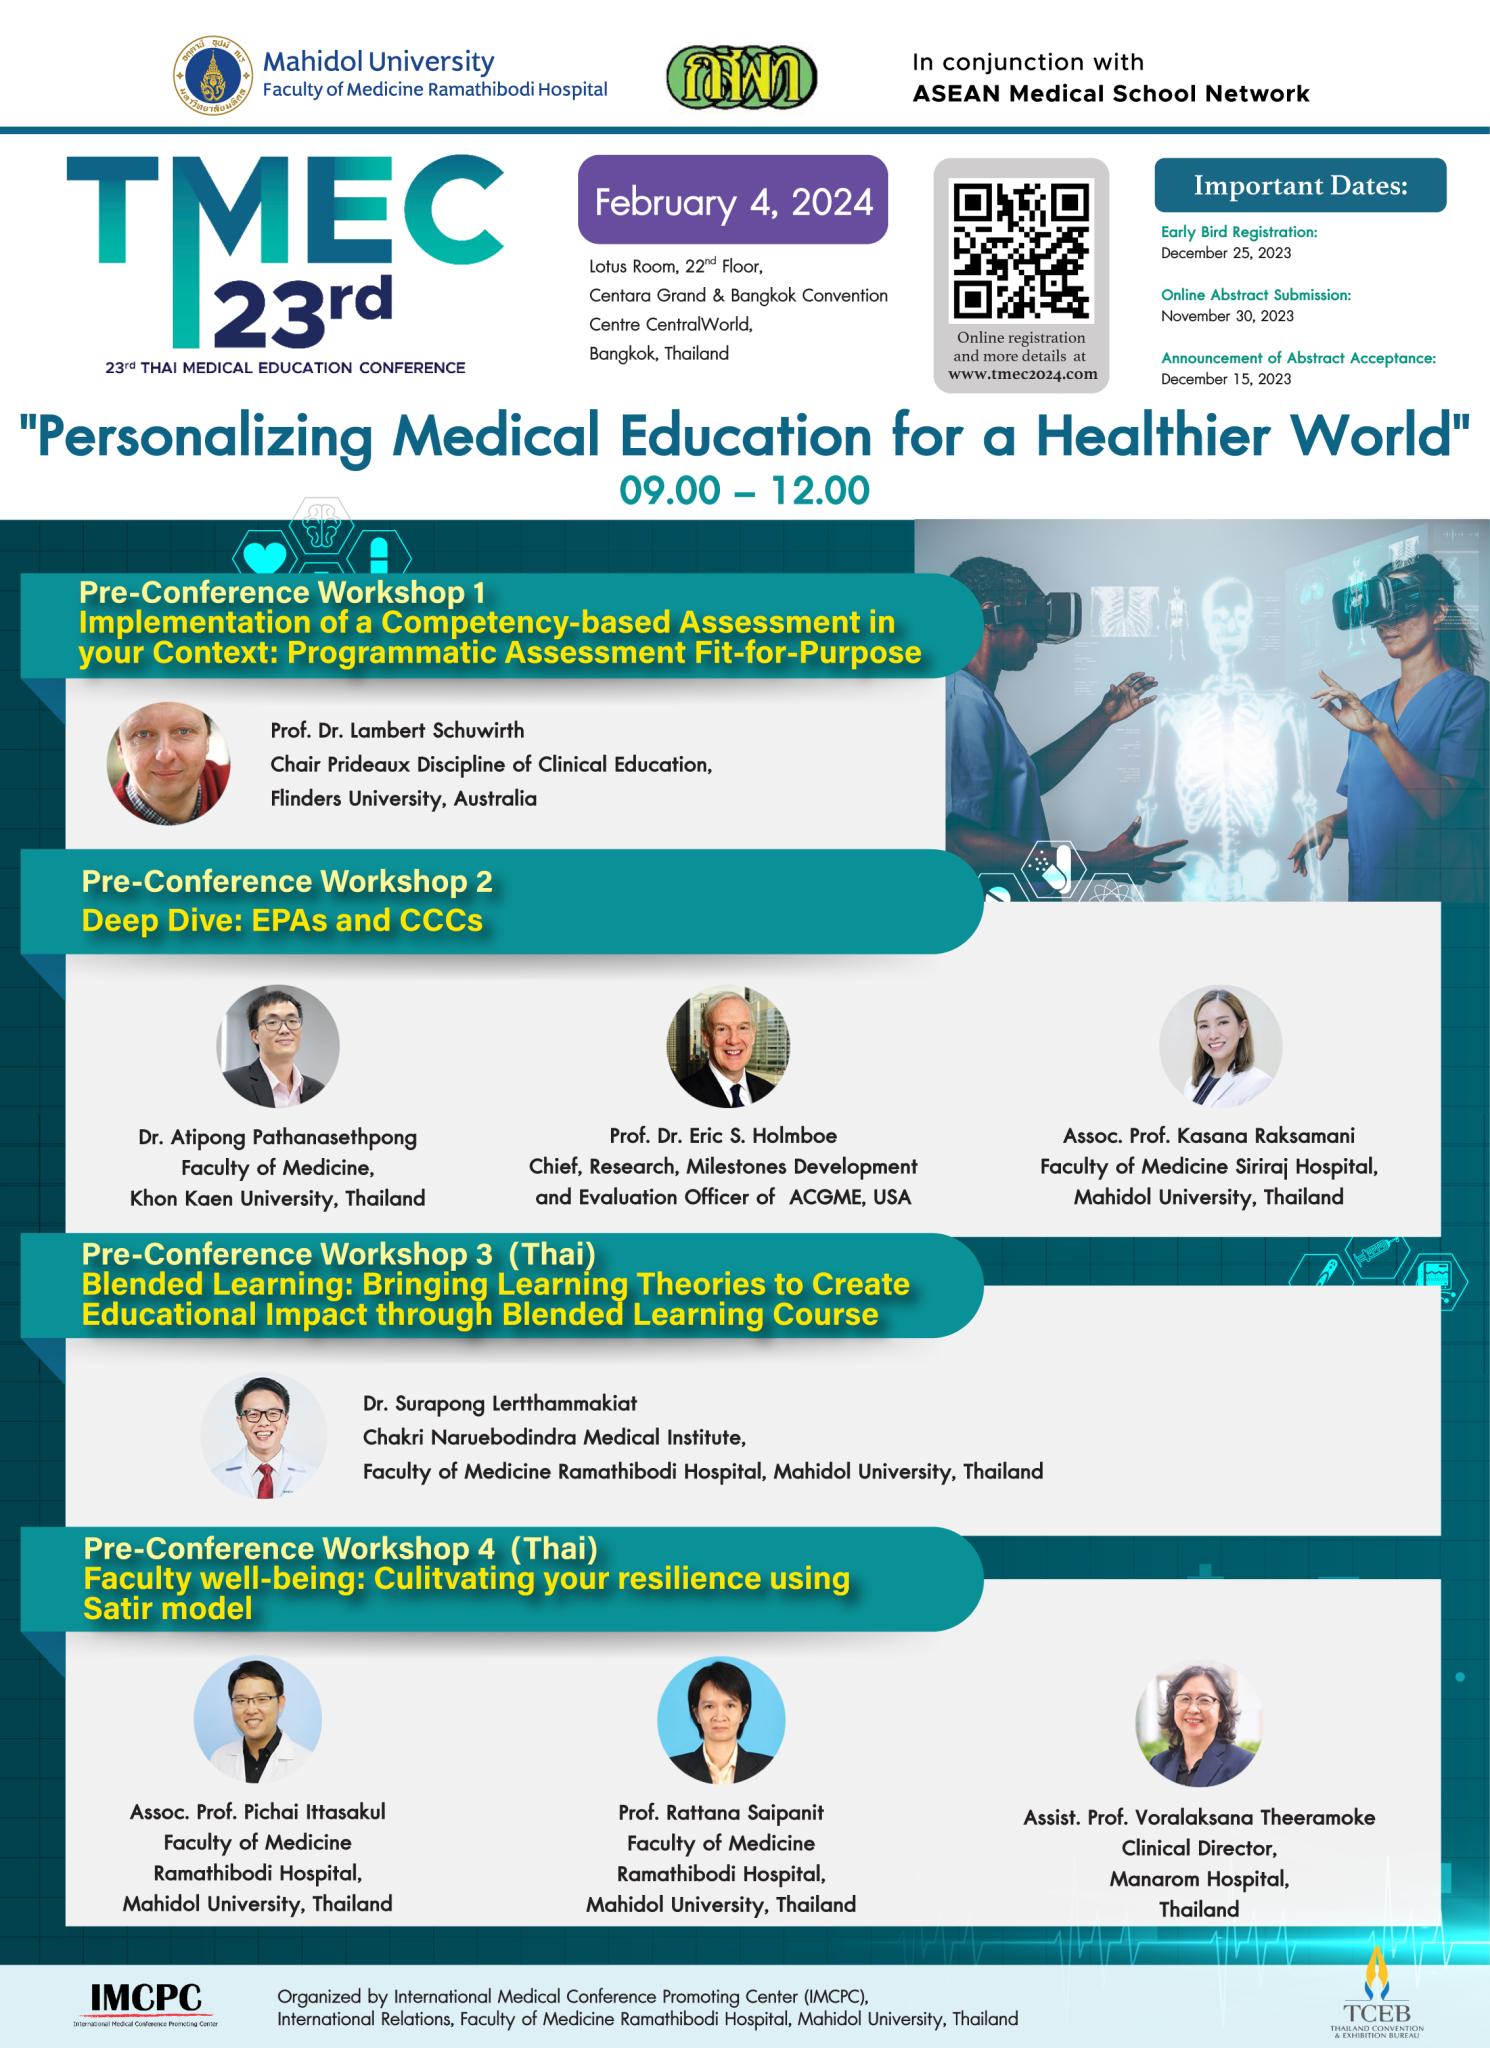 23rd TMEC "Personalizing Medical Education for a Healthier World"